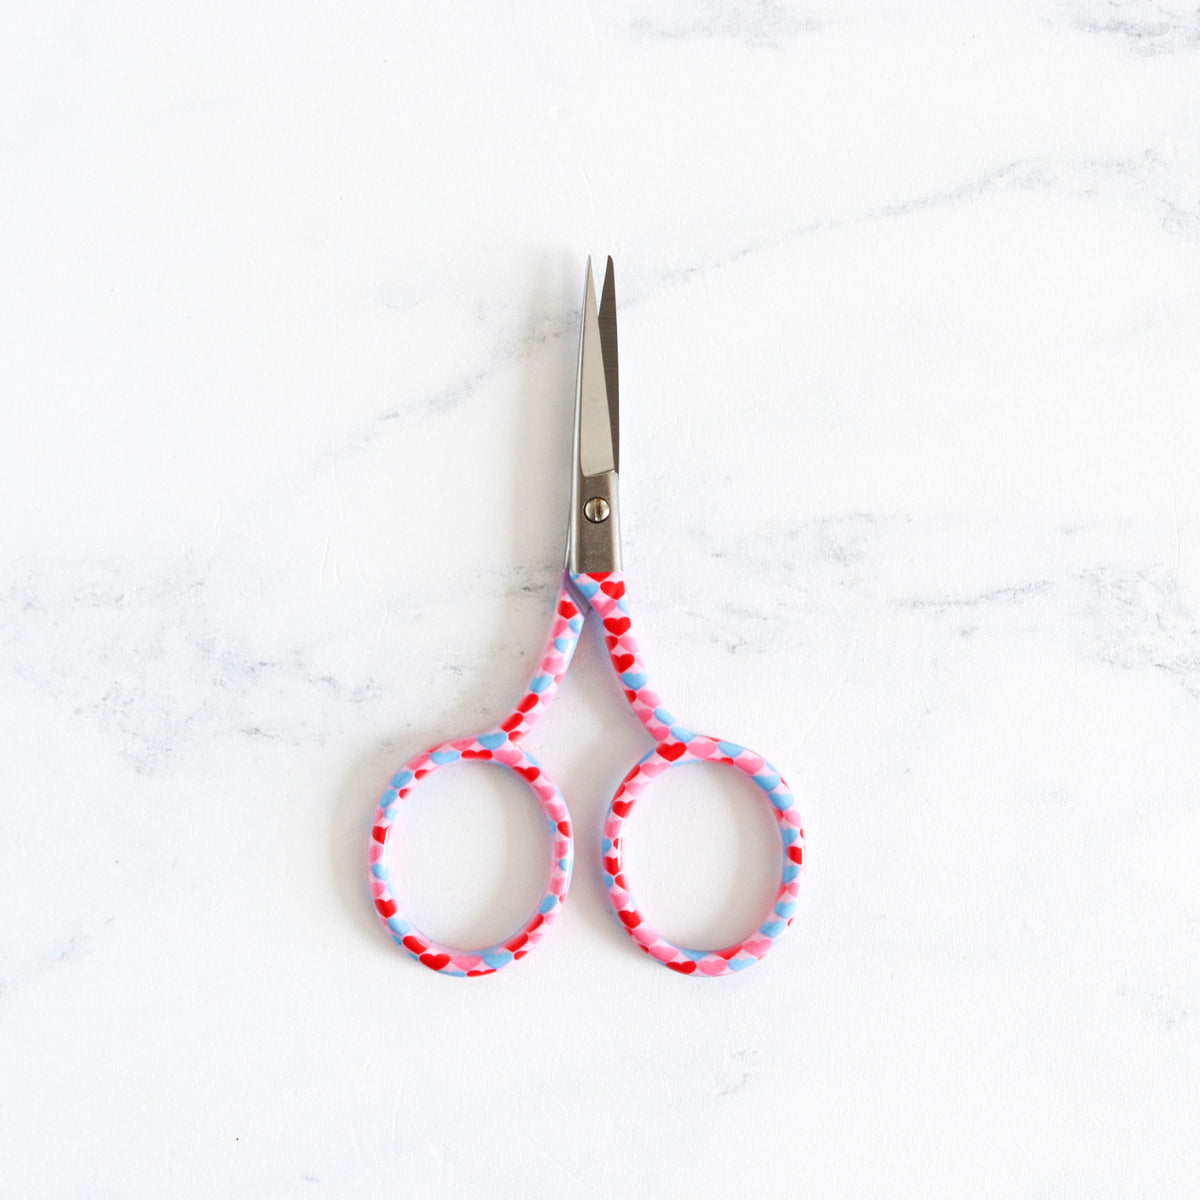 Patterned Embroidery Scissors - Red and Pink Hearts